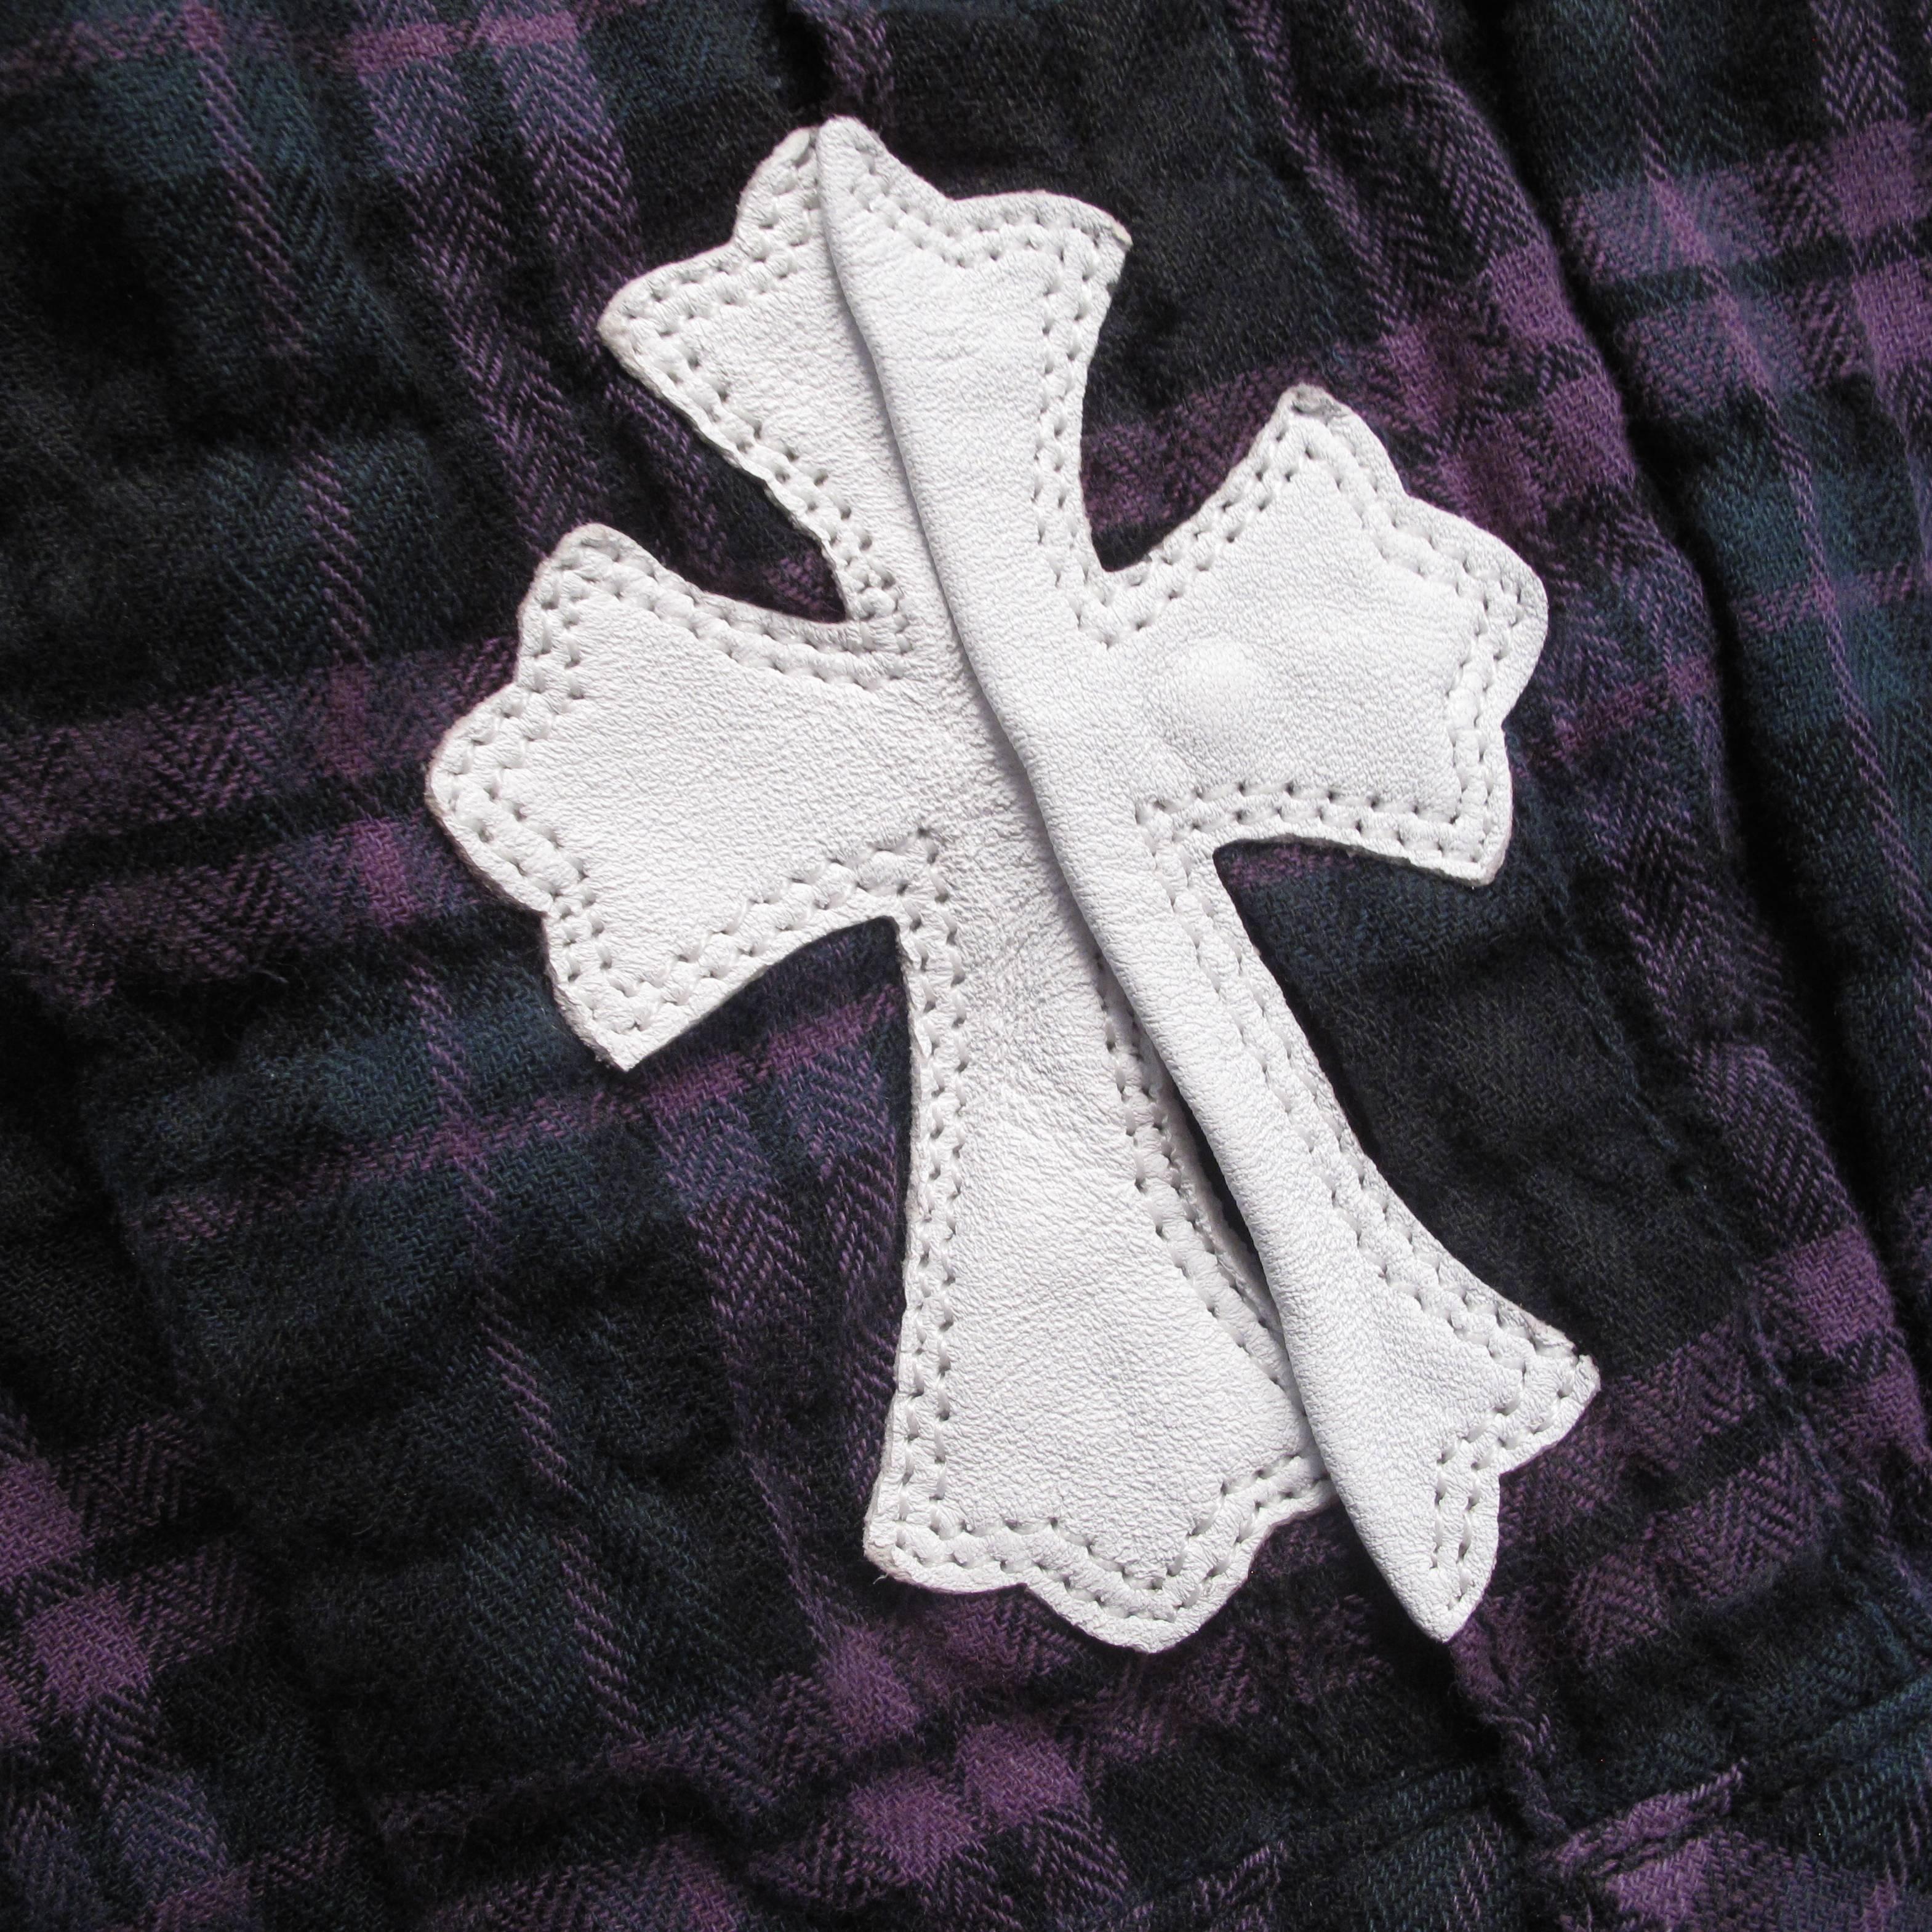 Black Chrome Hearts Shirt w/ Sterling Silver Buttons Leather Cross Purple Plaid Small